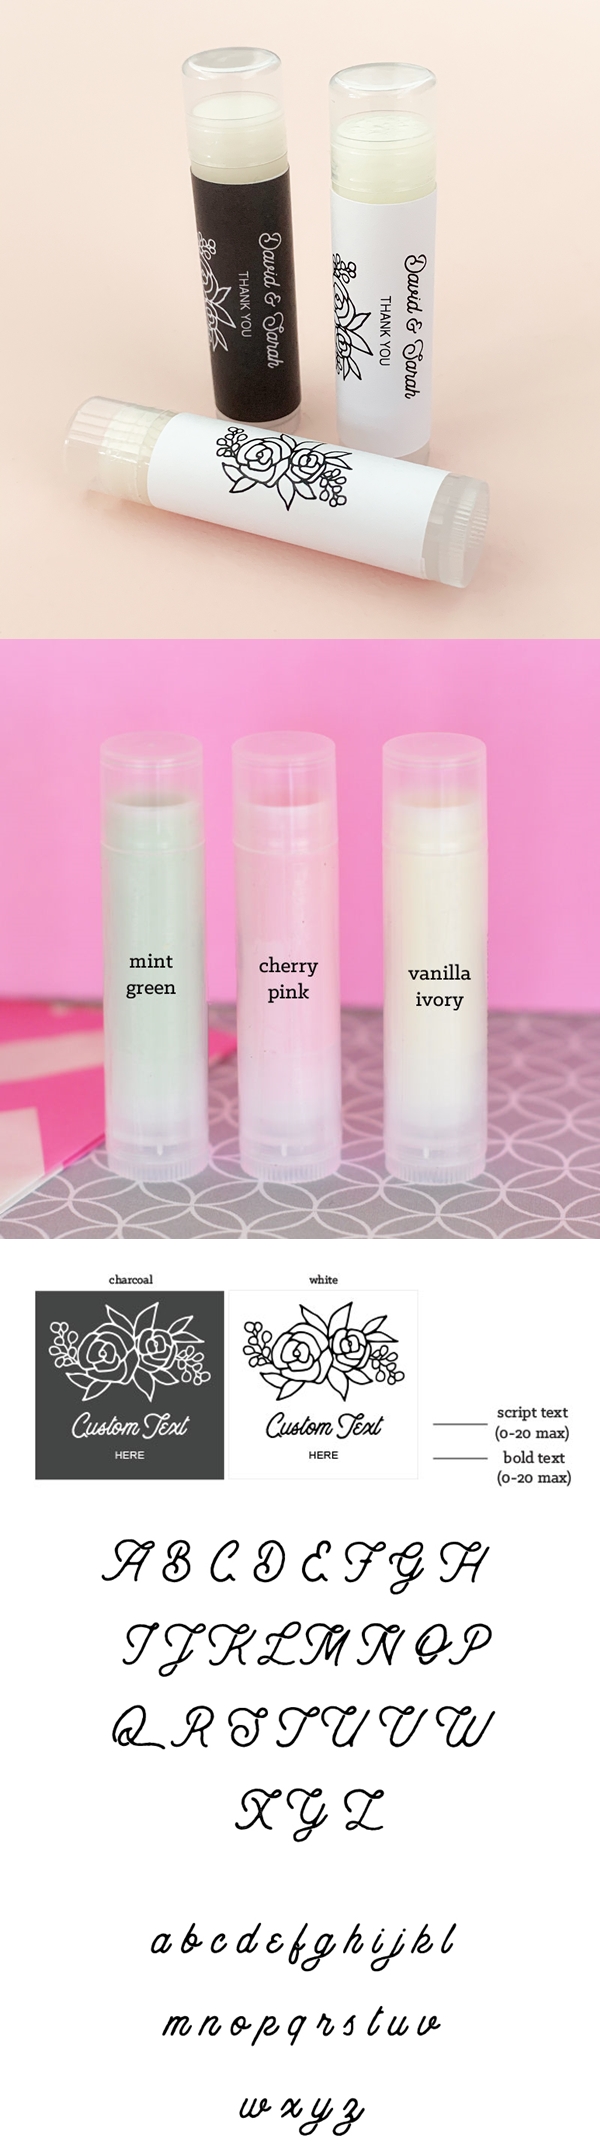 Event Blossom Personalized Floral Silhouette Design Lip Balm Tubes